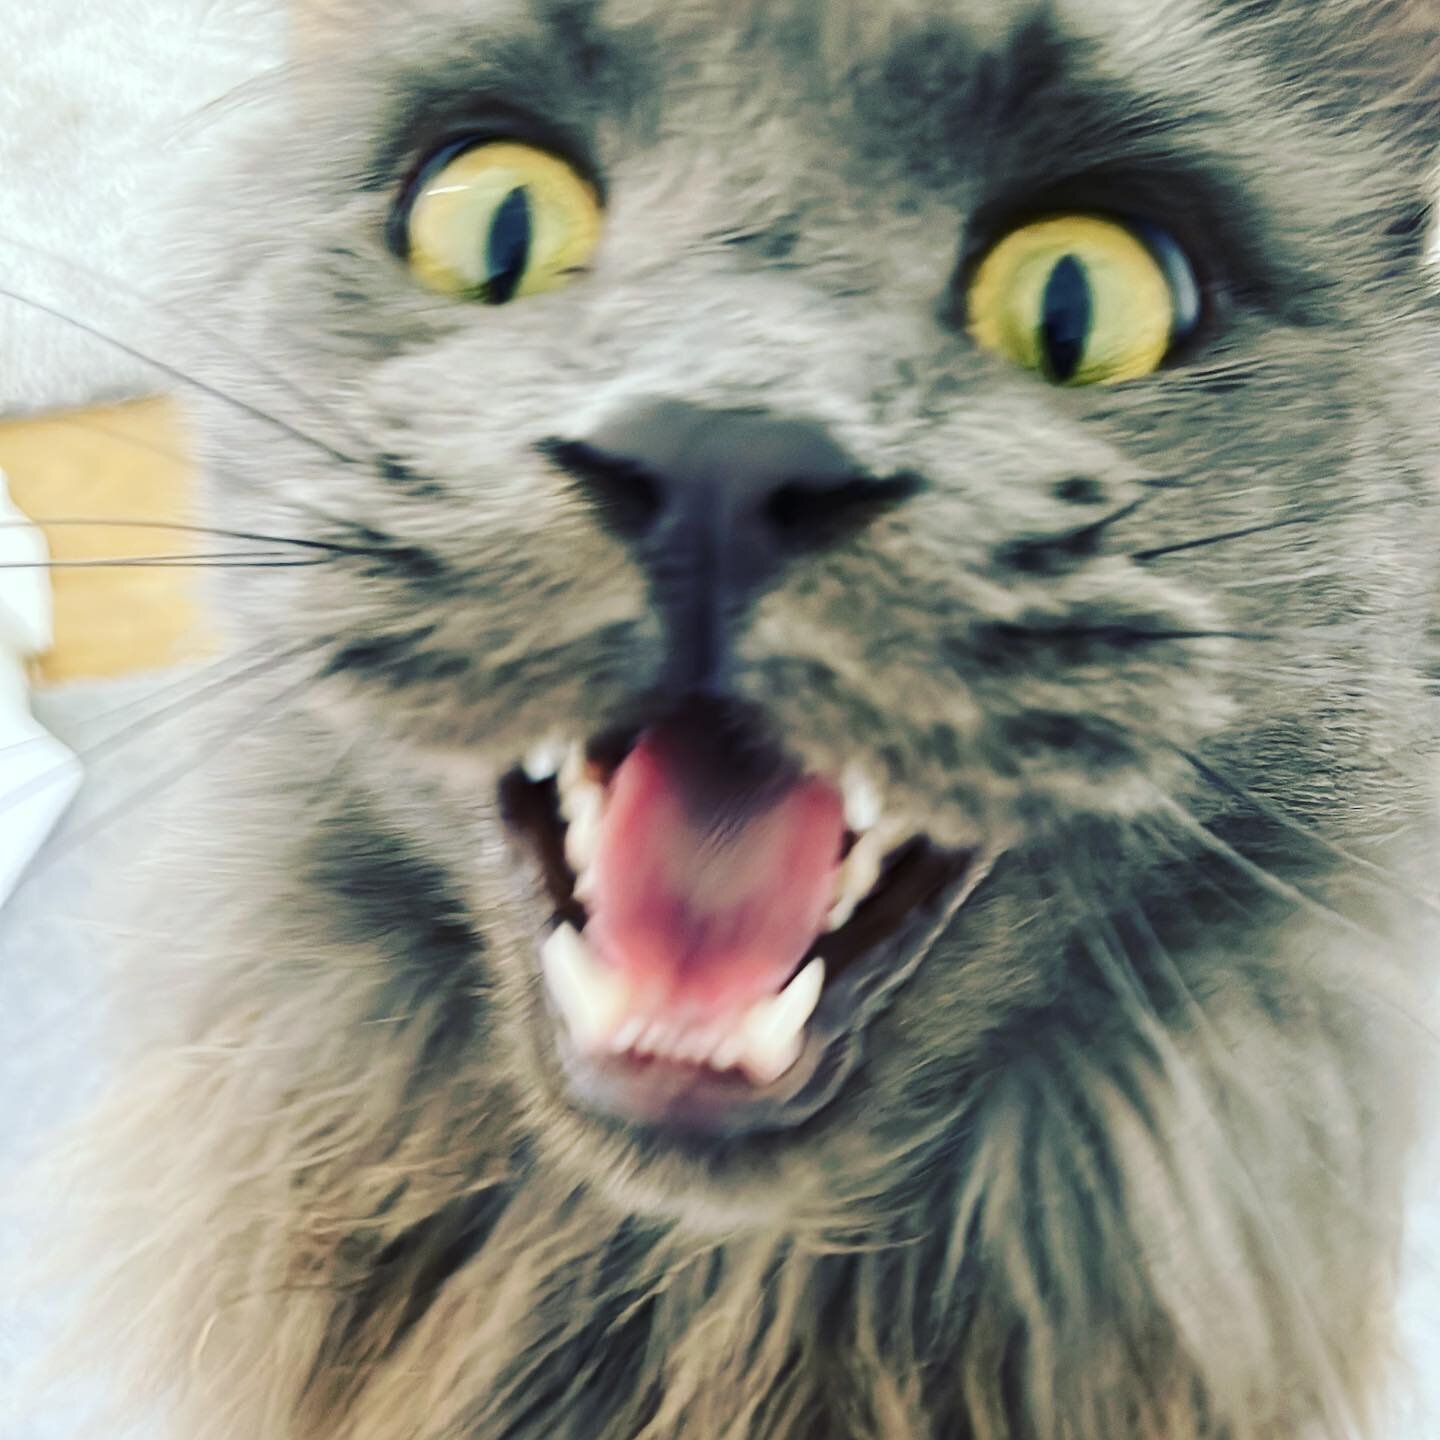 Hugo got himself stuck in a bedroom from breakfast till now, silly boy - he was not amused #londoncatsitter #catsitter #westlondonwhiskers #petservices #london #westlondoncatsitter #catsofinstagram #cats #gatto #instapet #catlovers #mainecoon #mainec